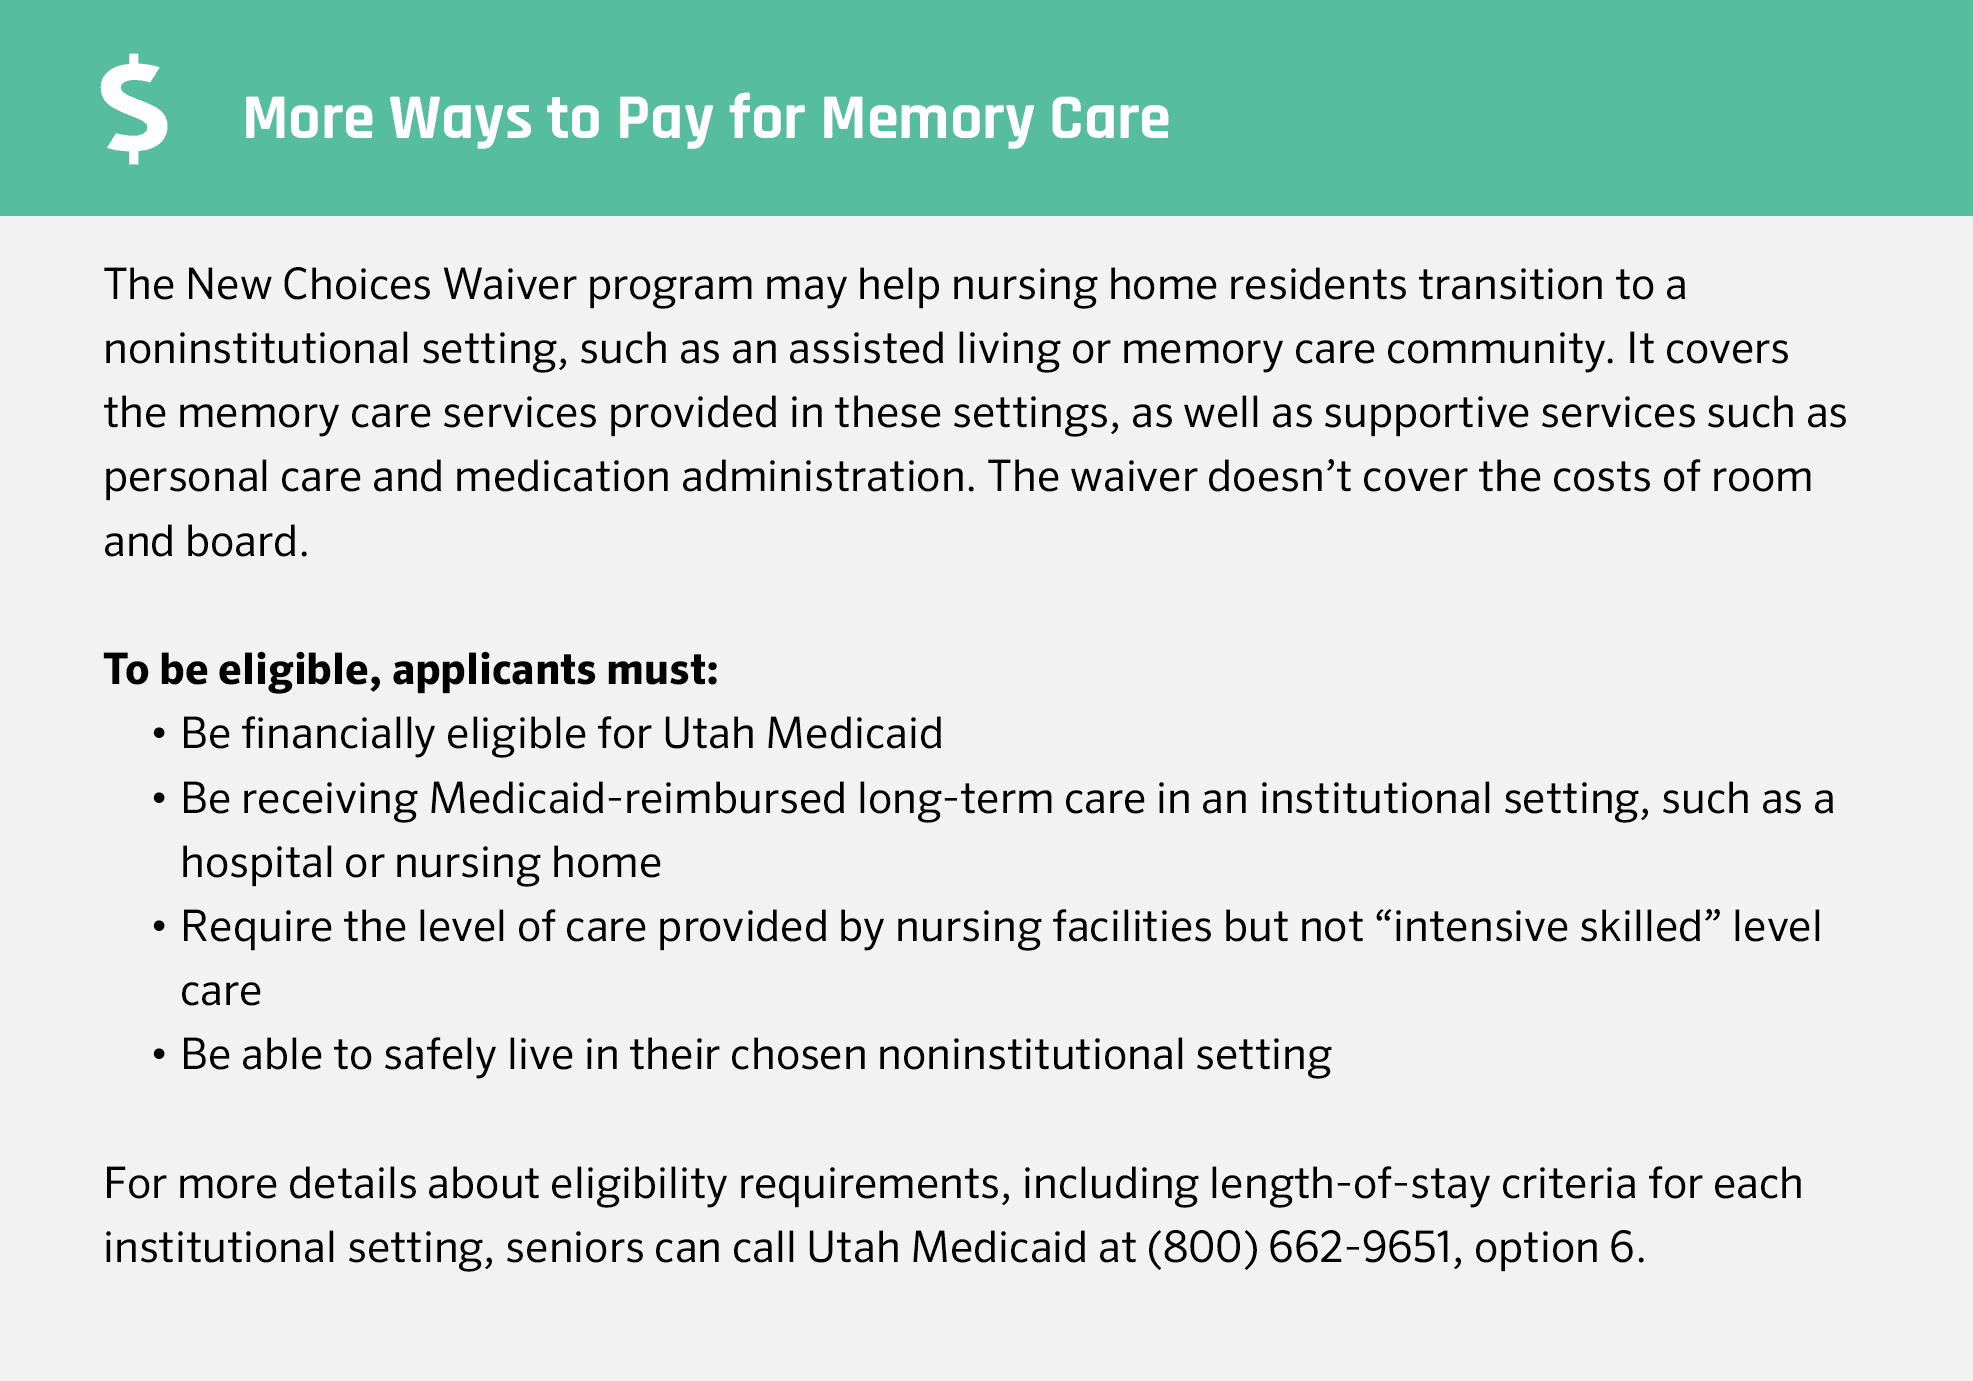 https://www.caring.com/_next/image?url=https%3A%2F%2Fdlyhjlf6lts50.cloudfront.net%2Fapp%2Fuploads%2F2022%2F07%2F3241606_memory-care-More-Ways-to-Pay-for-memory-care-in-utah.png&w=3840&q=75